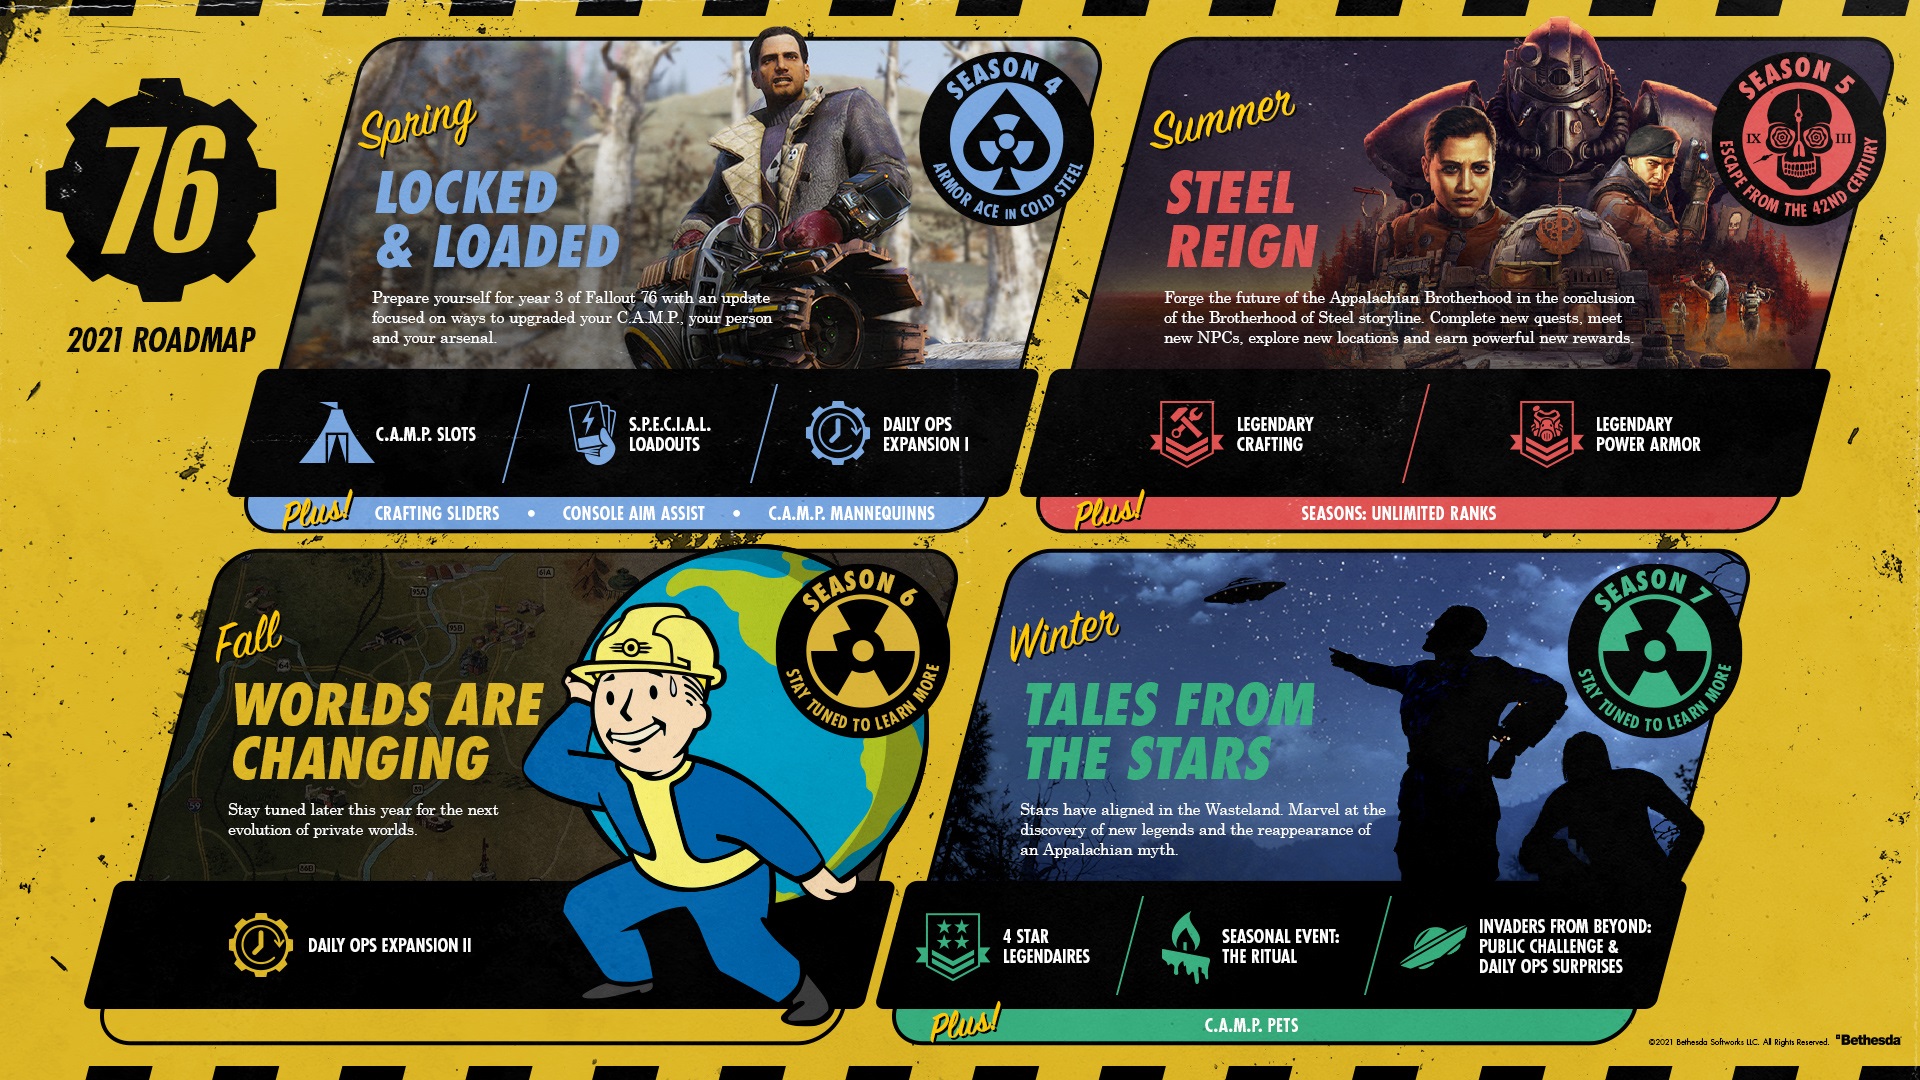 Fallout 76’s 2021 content roadmap has been revealed, covering seasons 4